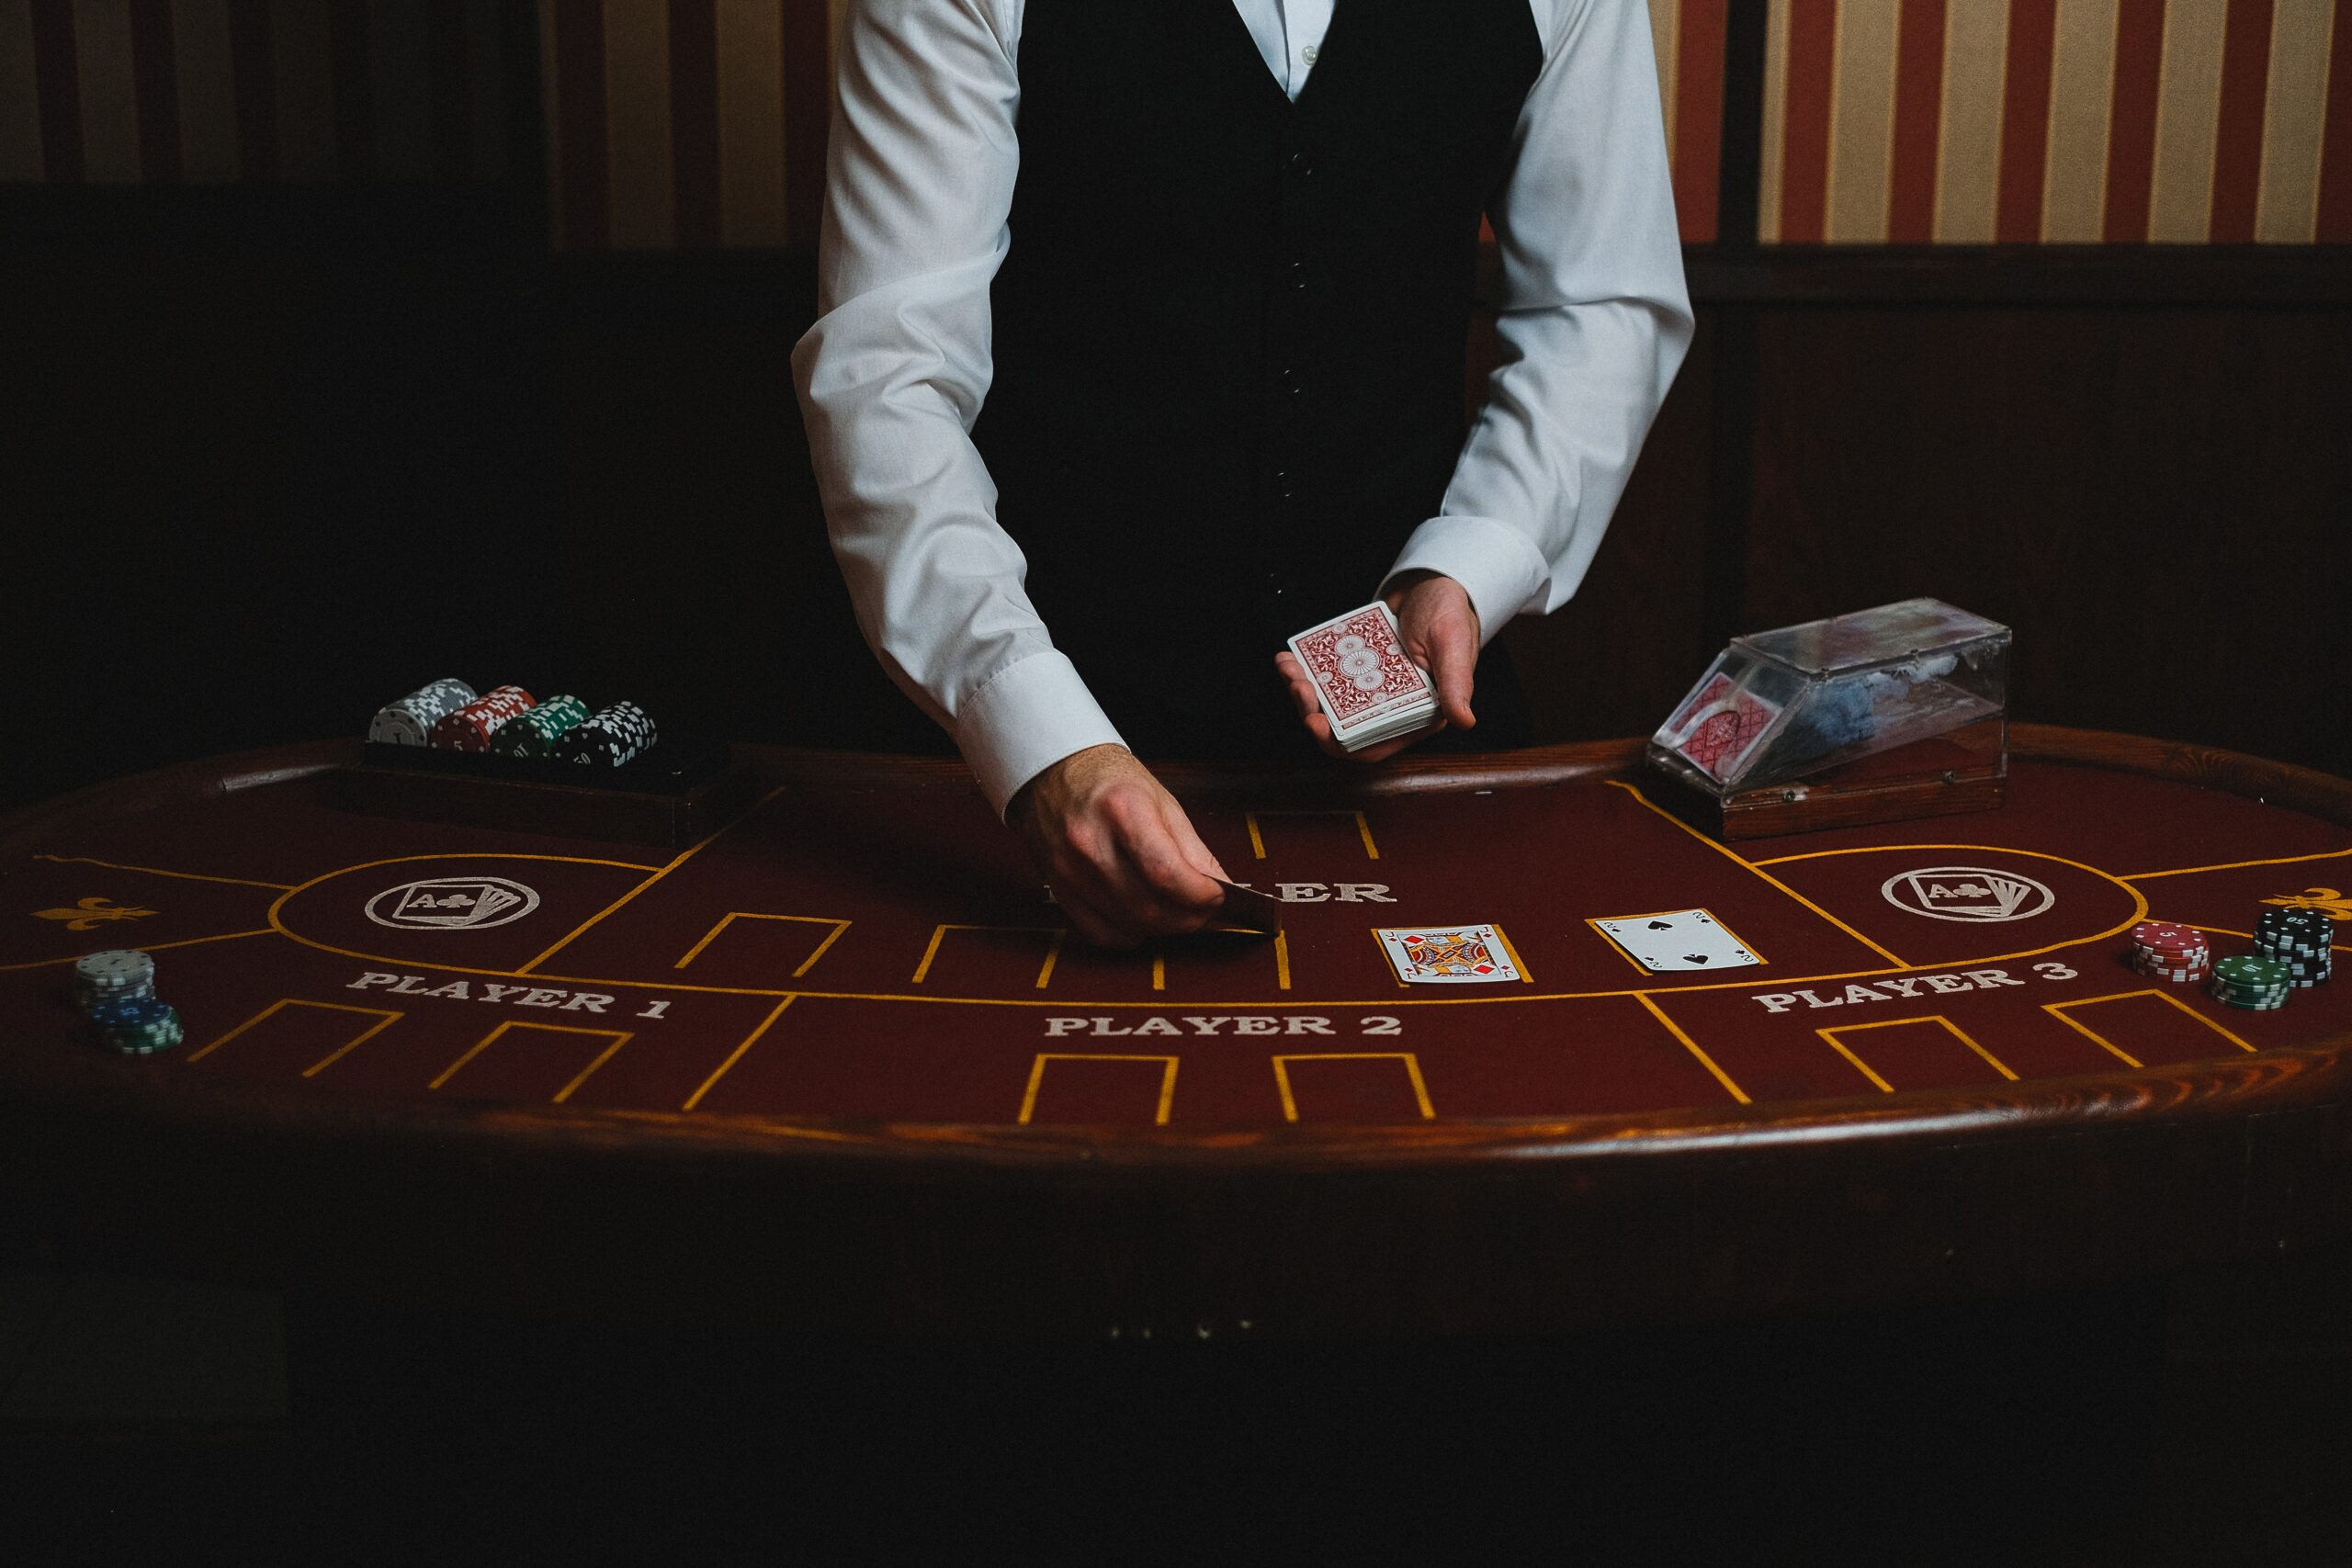 Unconventional Casino Games Taking the Spotlight